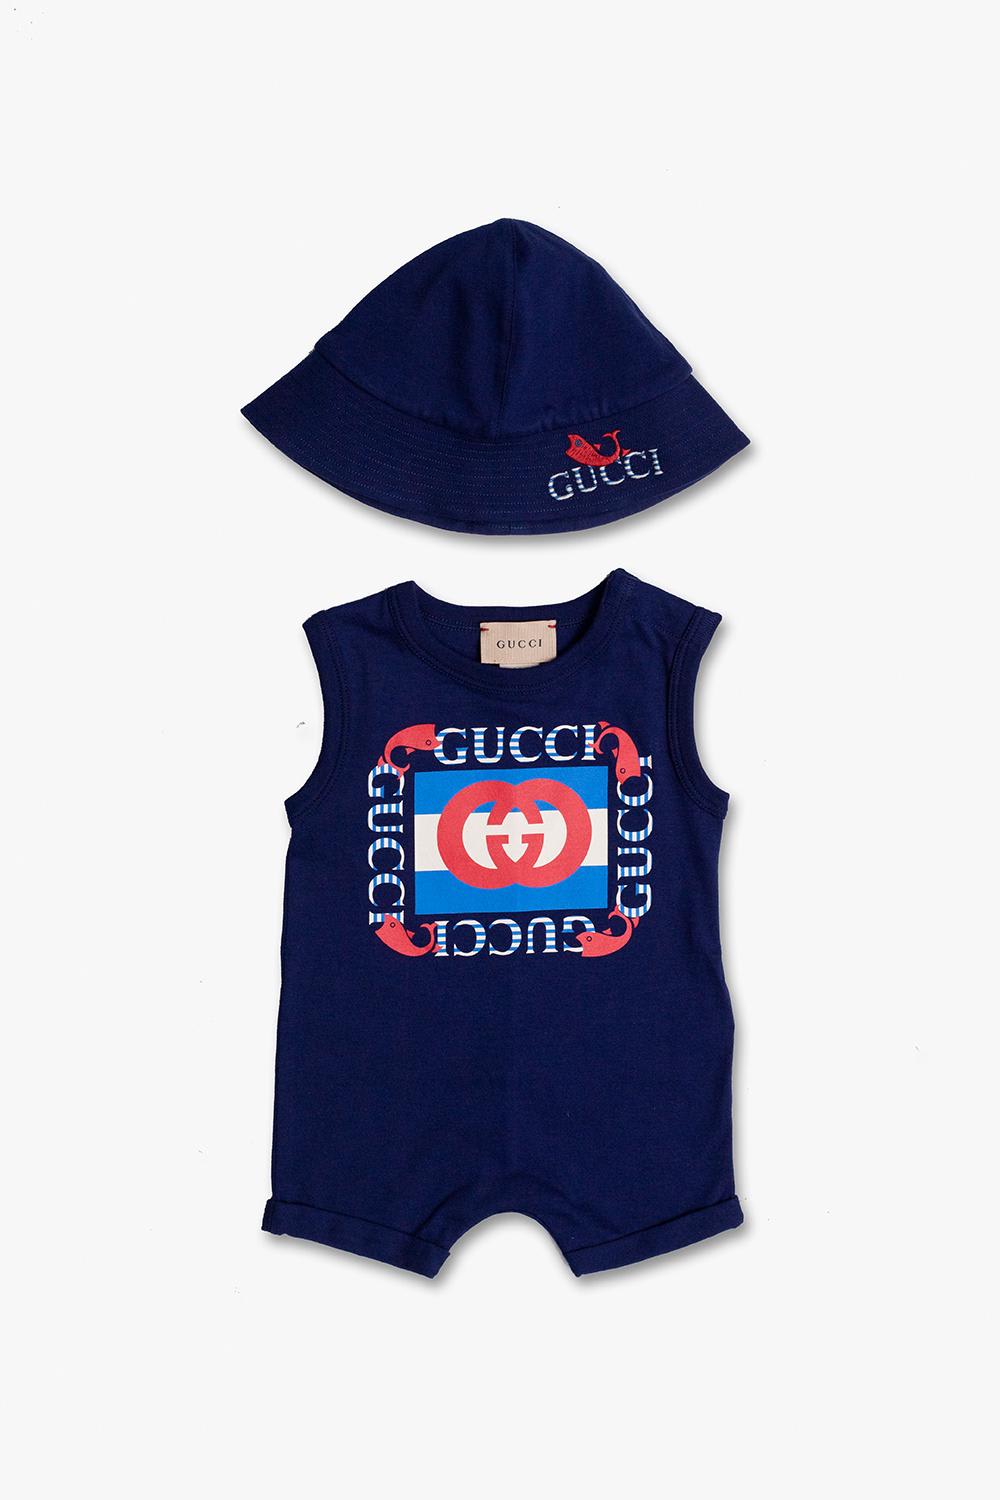 Gucci Babies' Bucket Hat & Body Set In Inchiostro